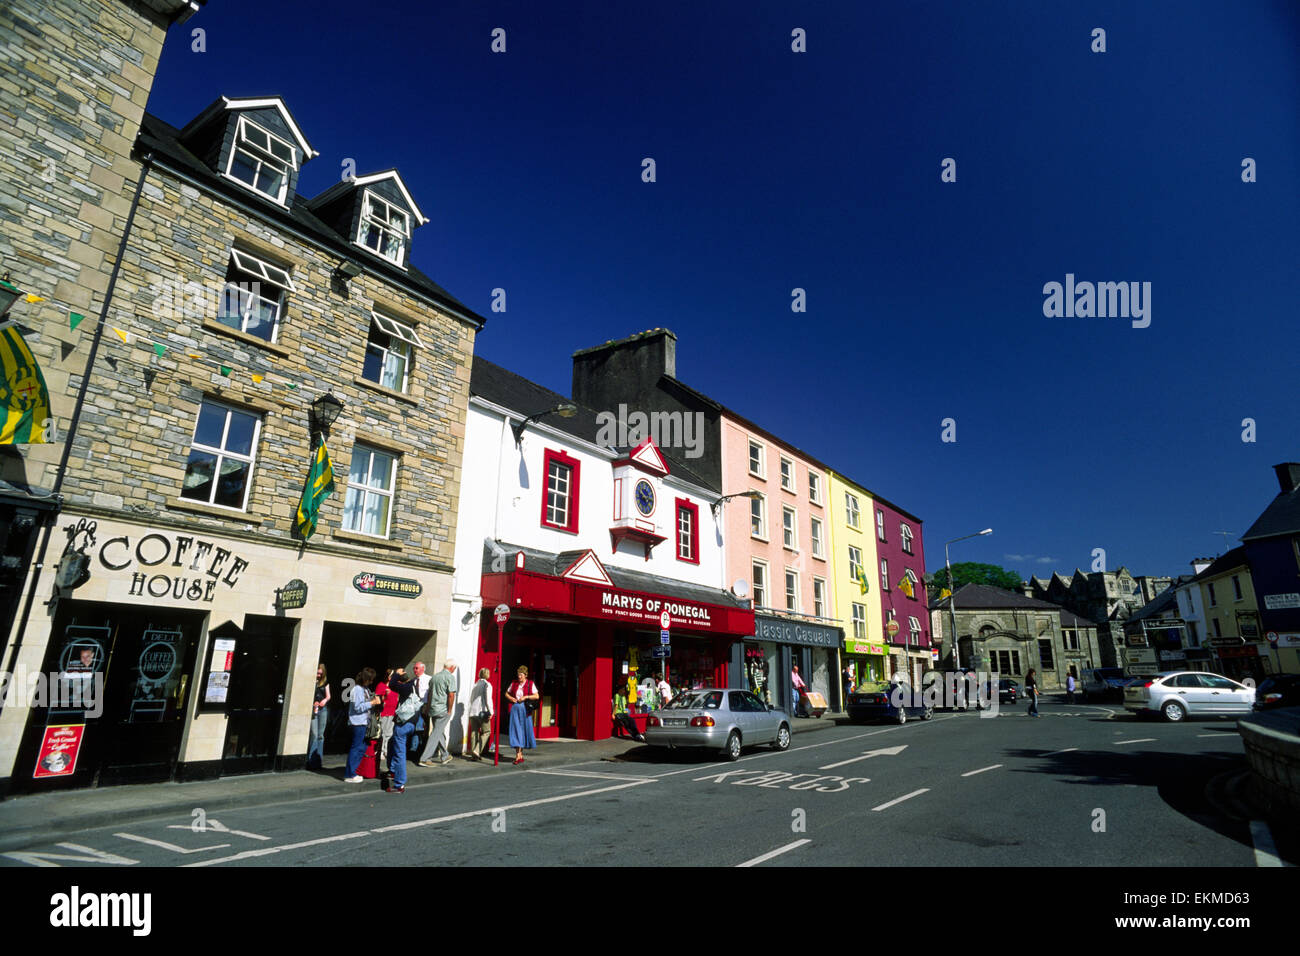 Diamond Square, Donegal, County Donegal, Irland Stockfoto